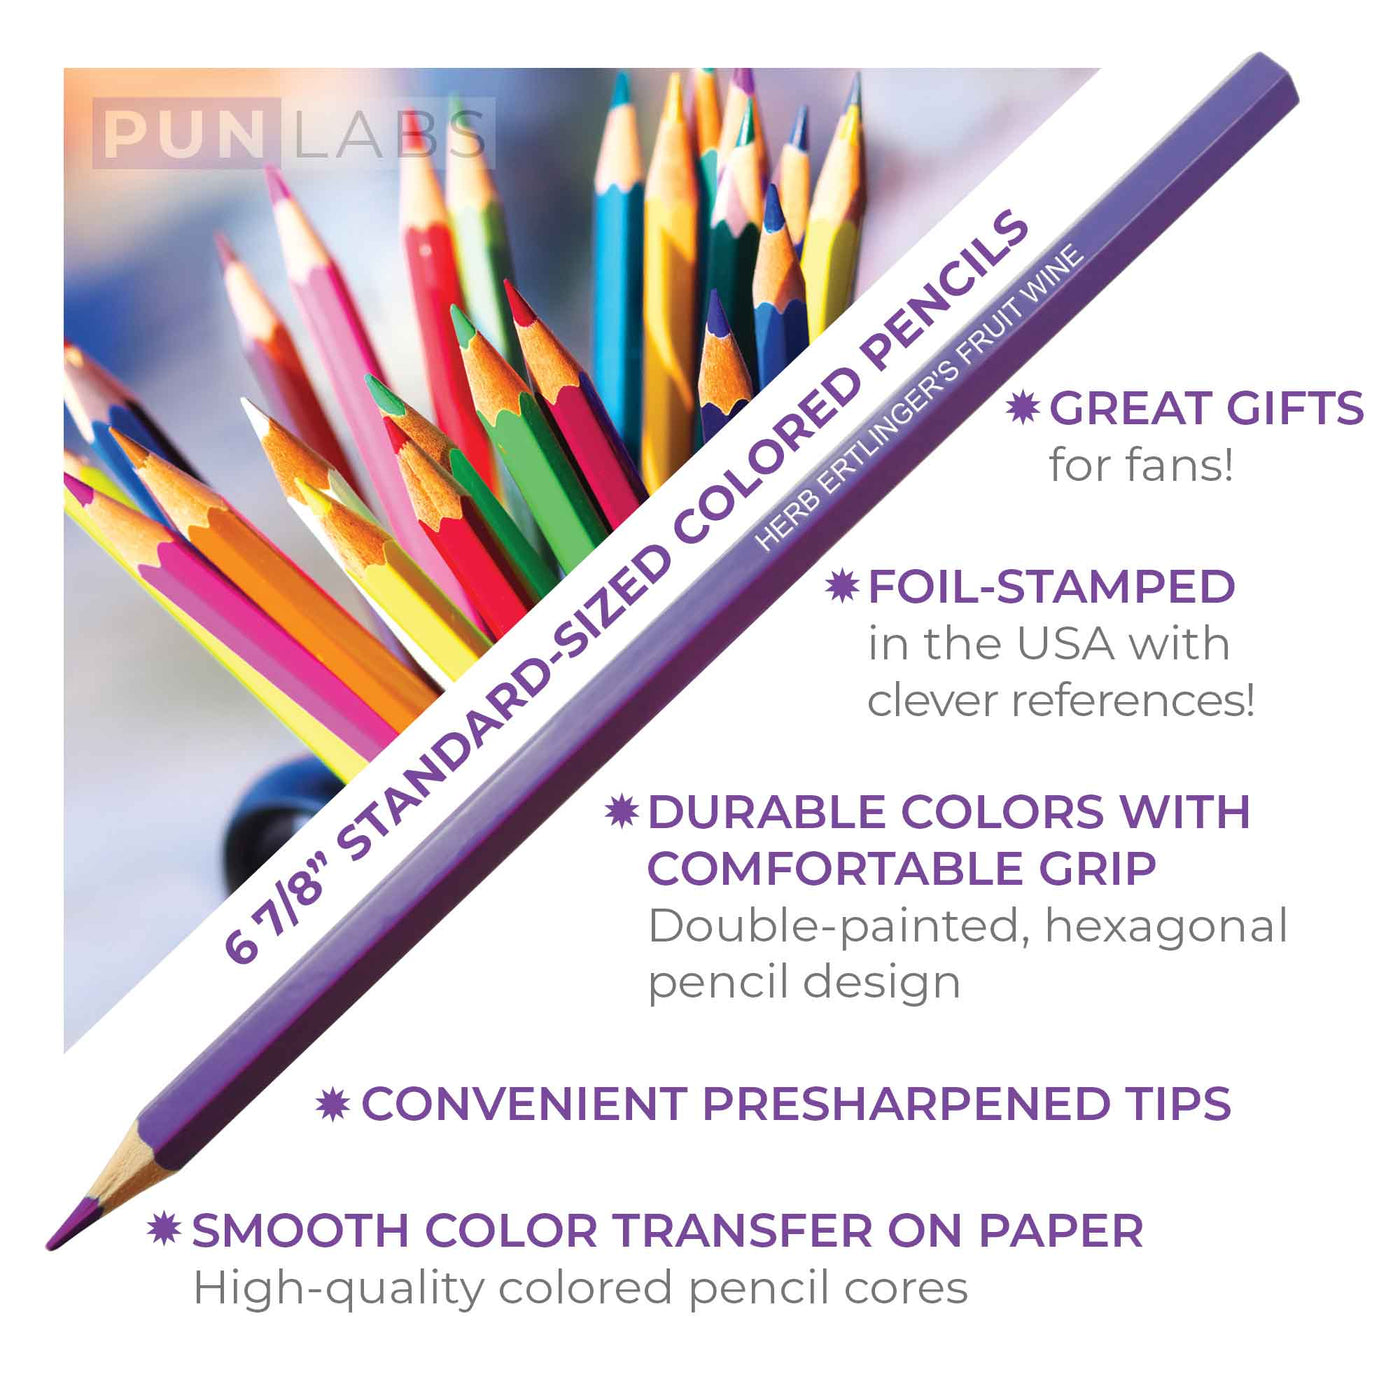 Features of our colored pencils